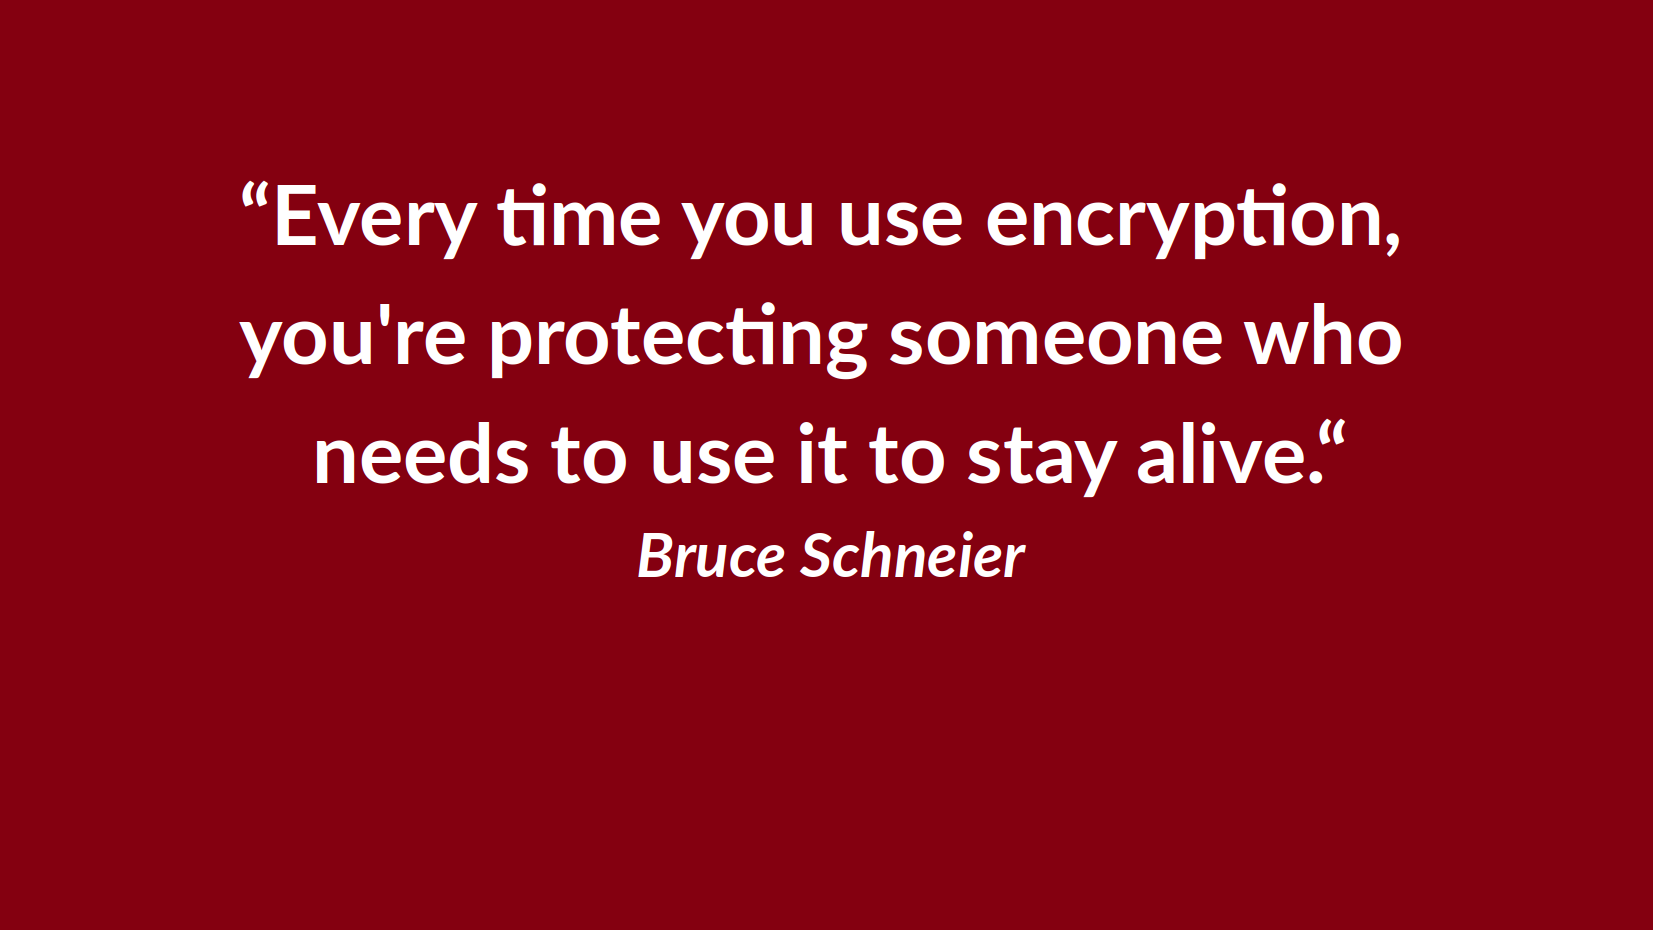 Whenever you use encryption, you are protecting someone who needs it to stay alice. - Bruce Schneier